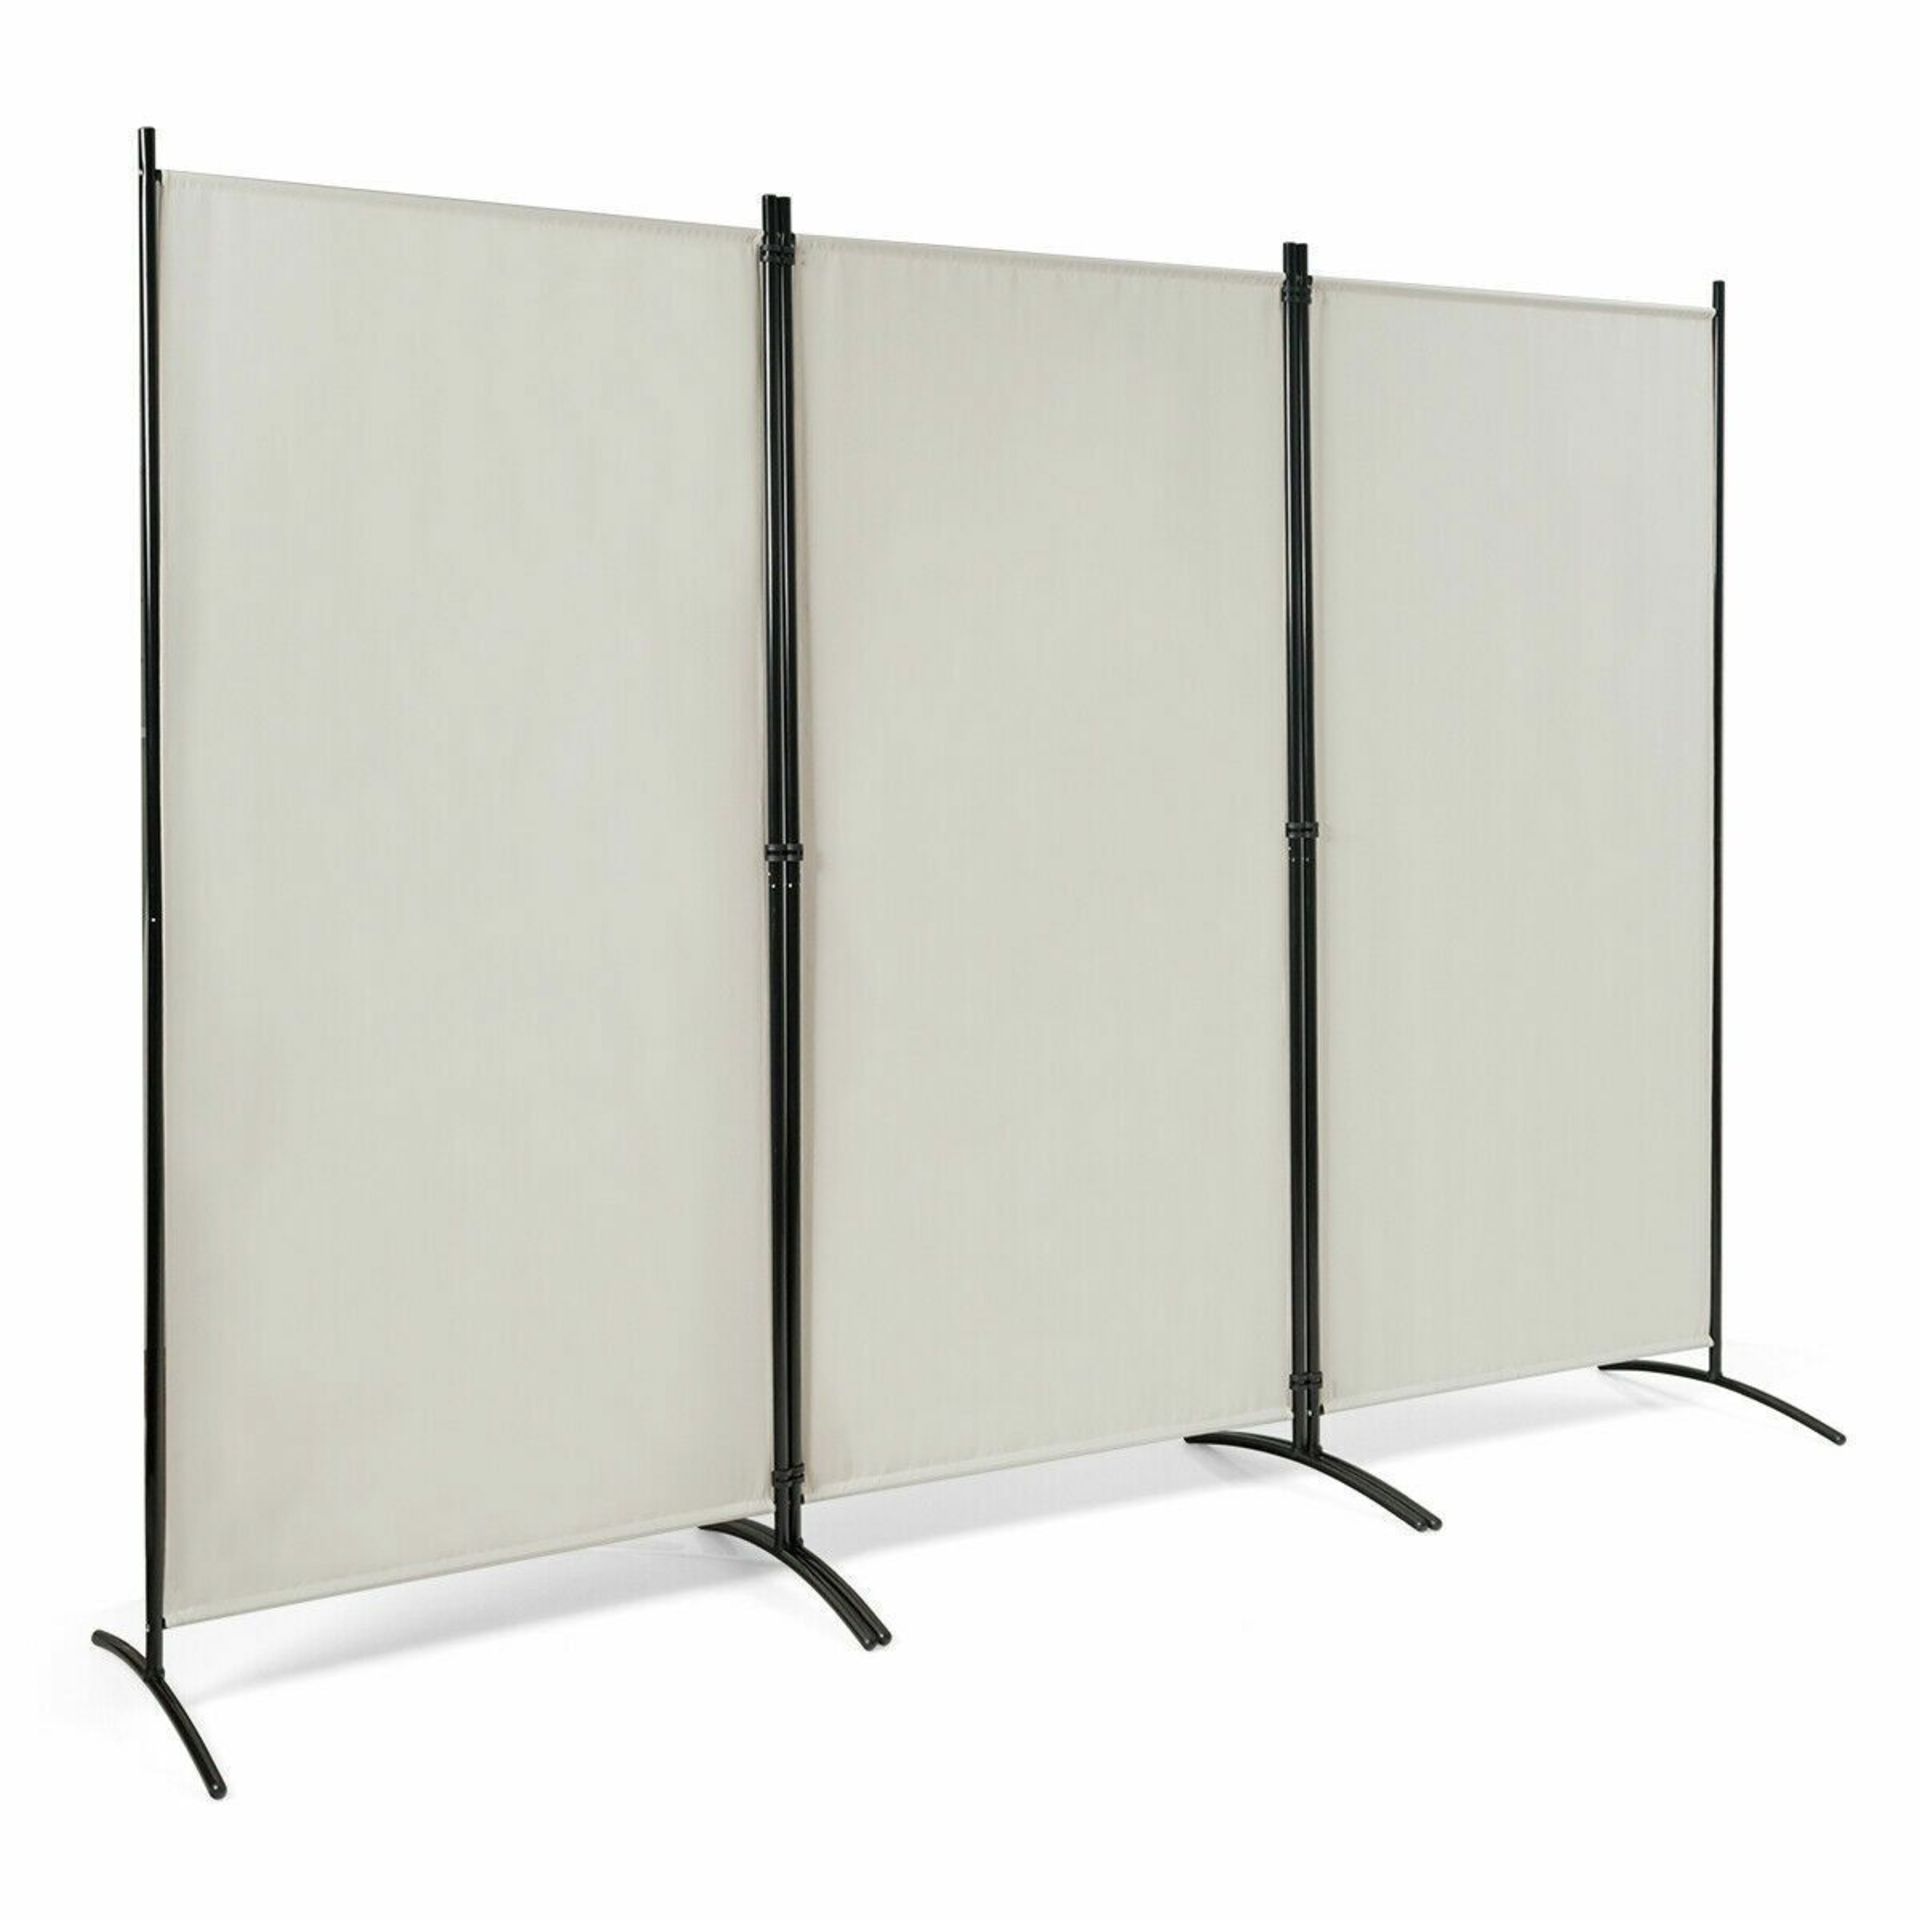 Costway Folding Room Divider 3 Panel Wall Privacy Screen Protector - HW65774WH. - ER53.